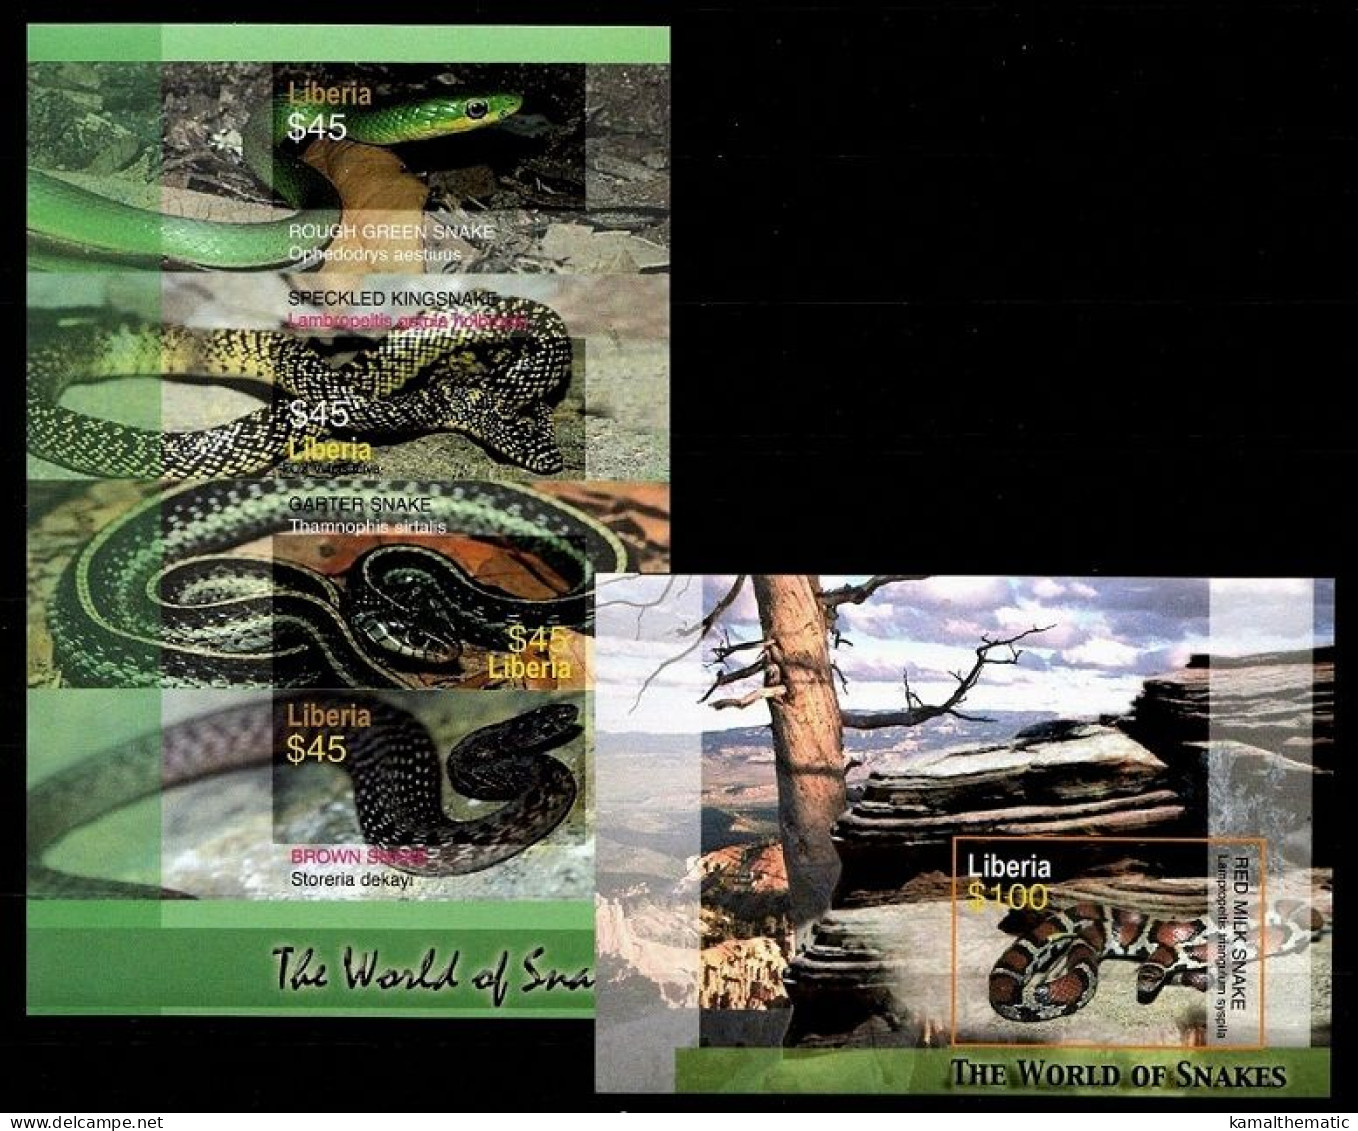 Rough Green, Speckled King, Red Milk, Garter, Snakes Reptiles, Liberia 2006 MNH Imperf MS+SS - Serpientes